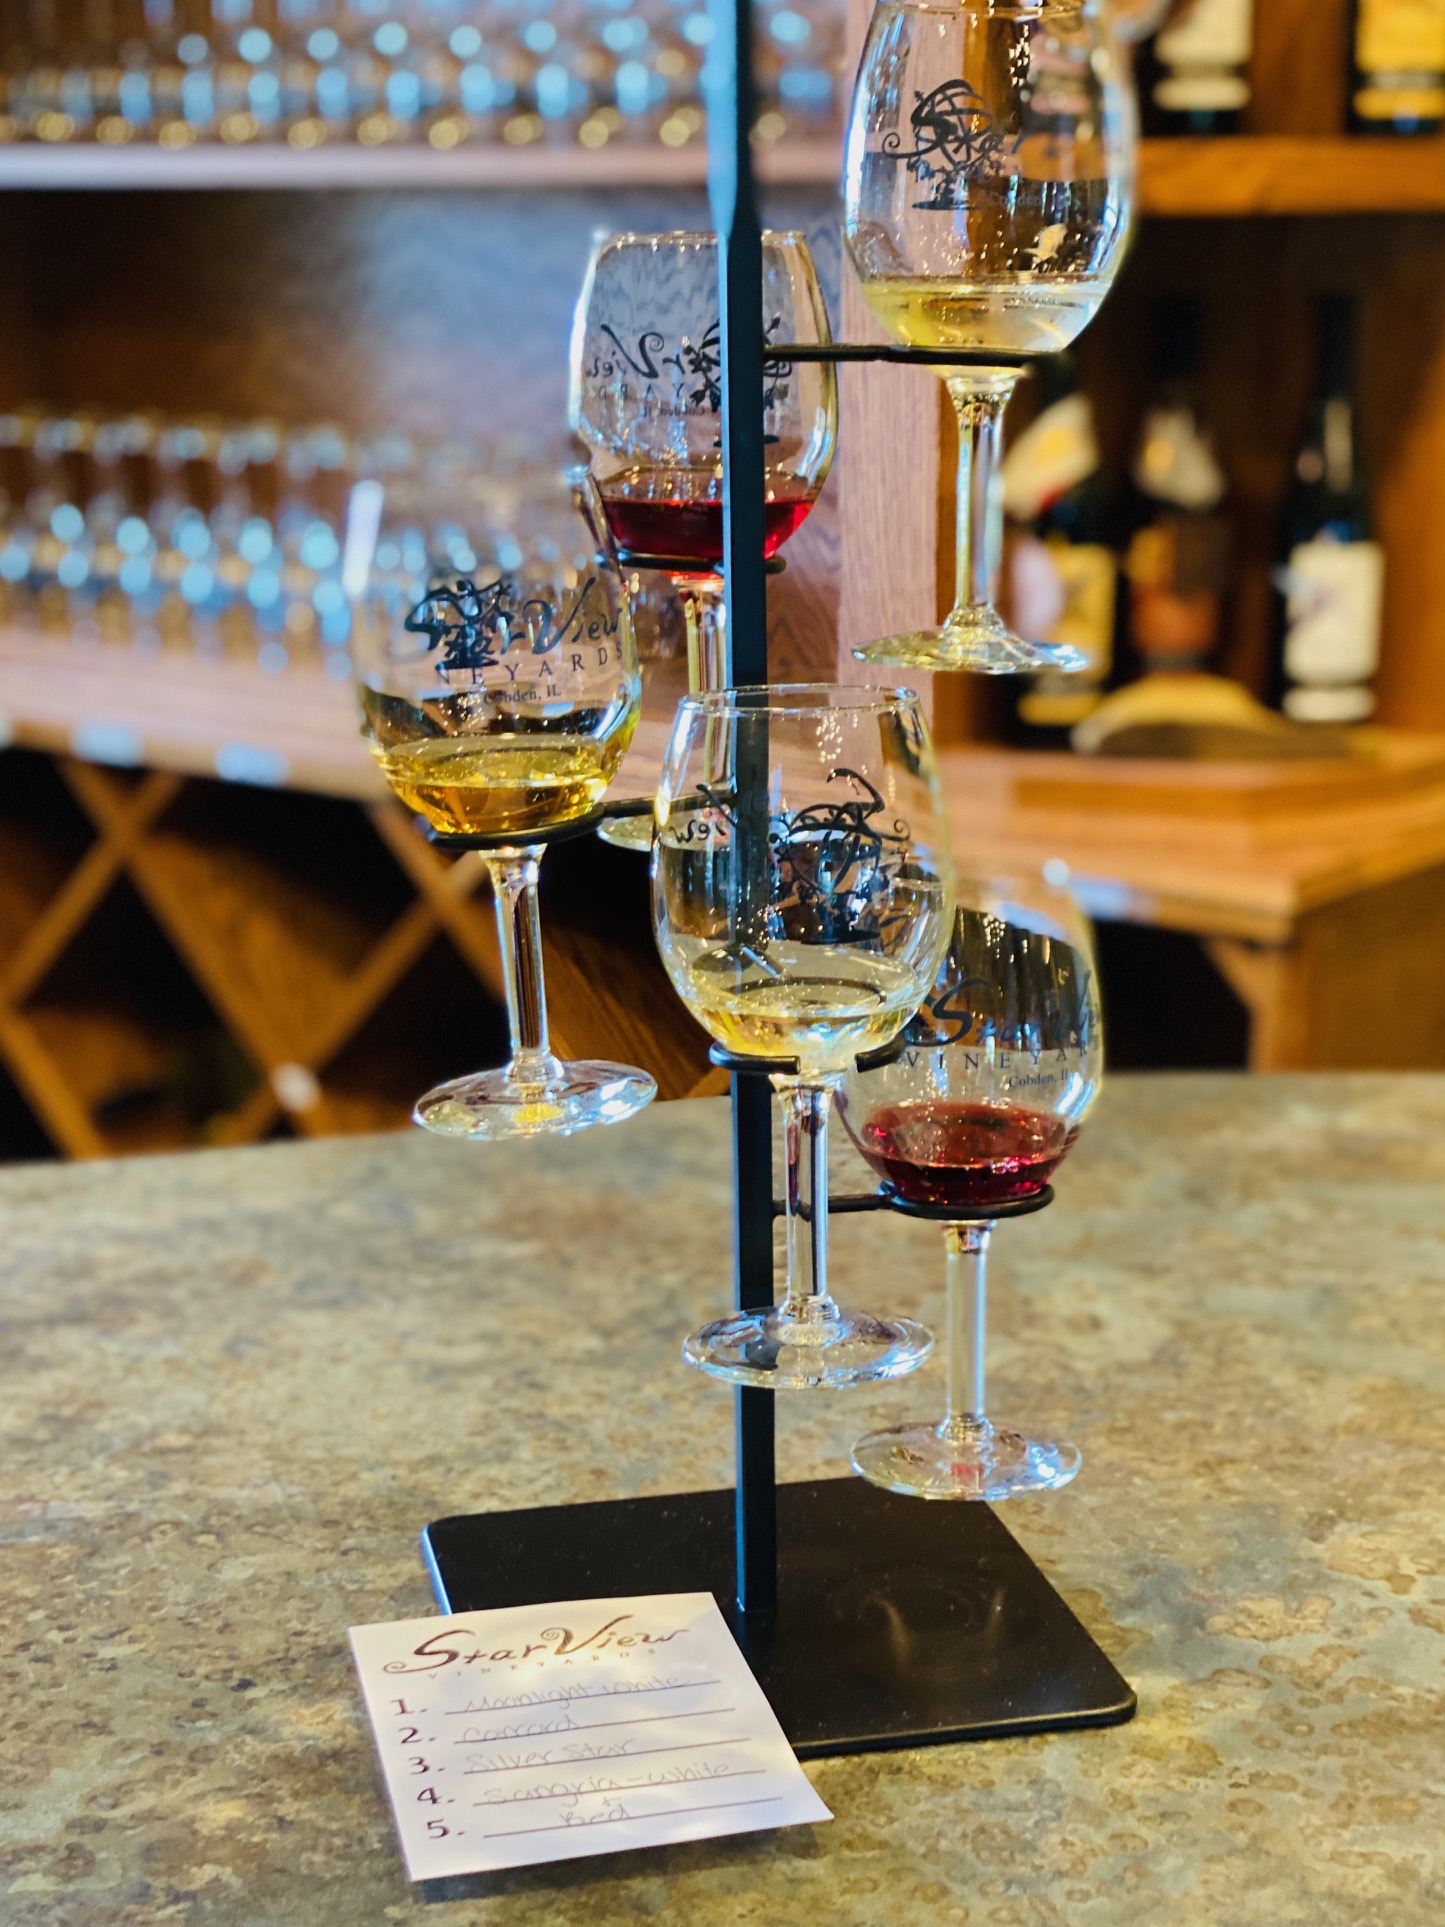 Star View Vineyards, near Cobden, Ill., offers wine tasting flights displayed in a unique wine glass “tree.” 